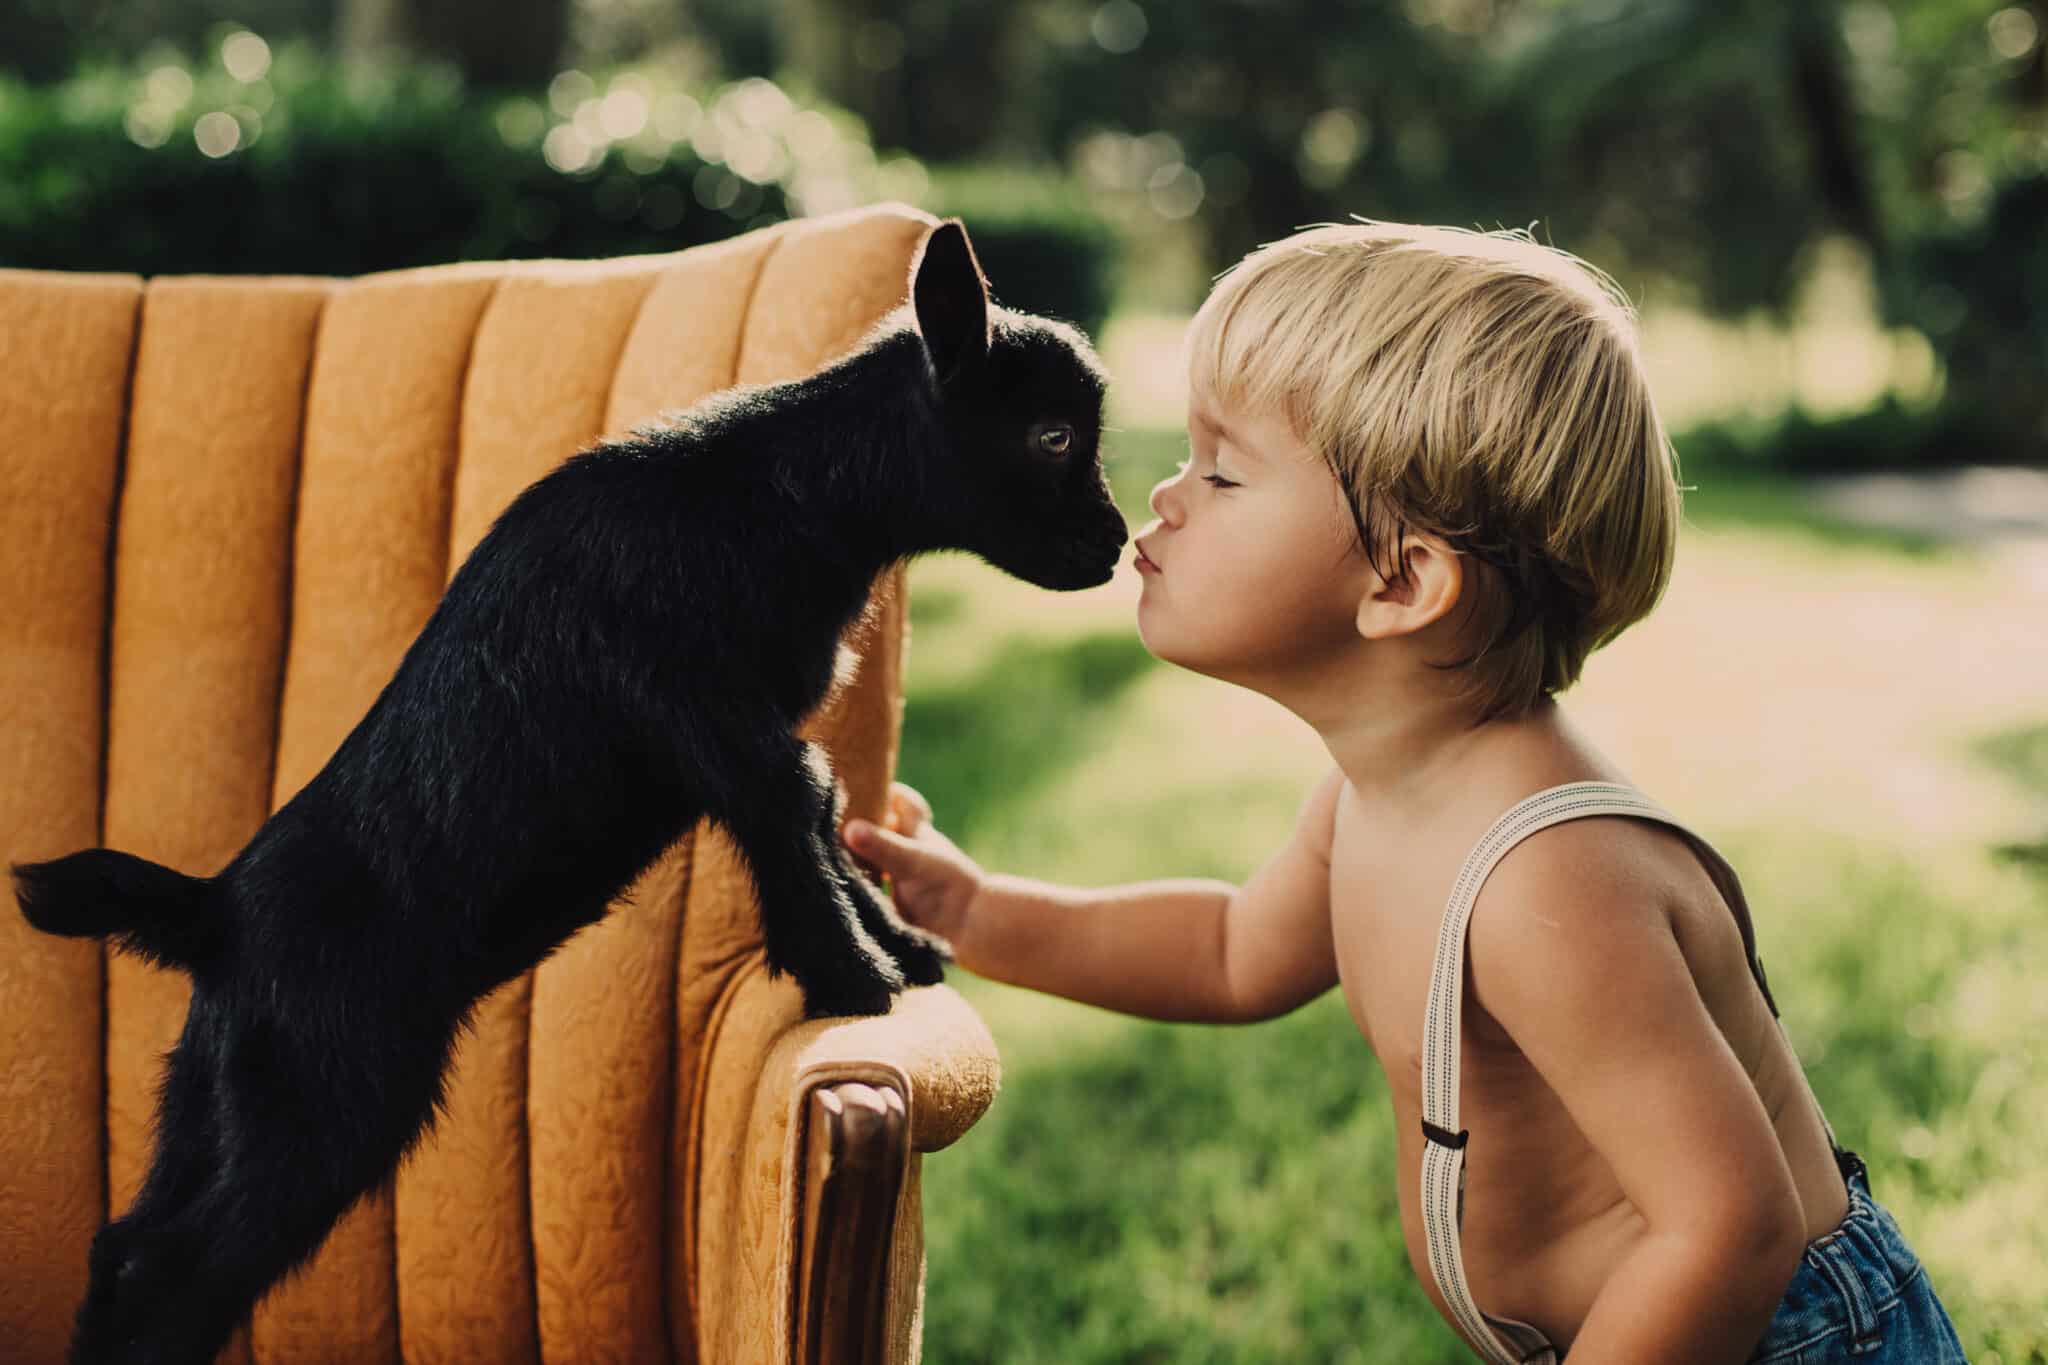 a bare chested toddler boy in suspenders standing in the grass kissing a baby goat, that is standing on a